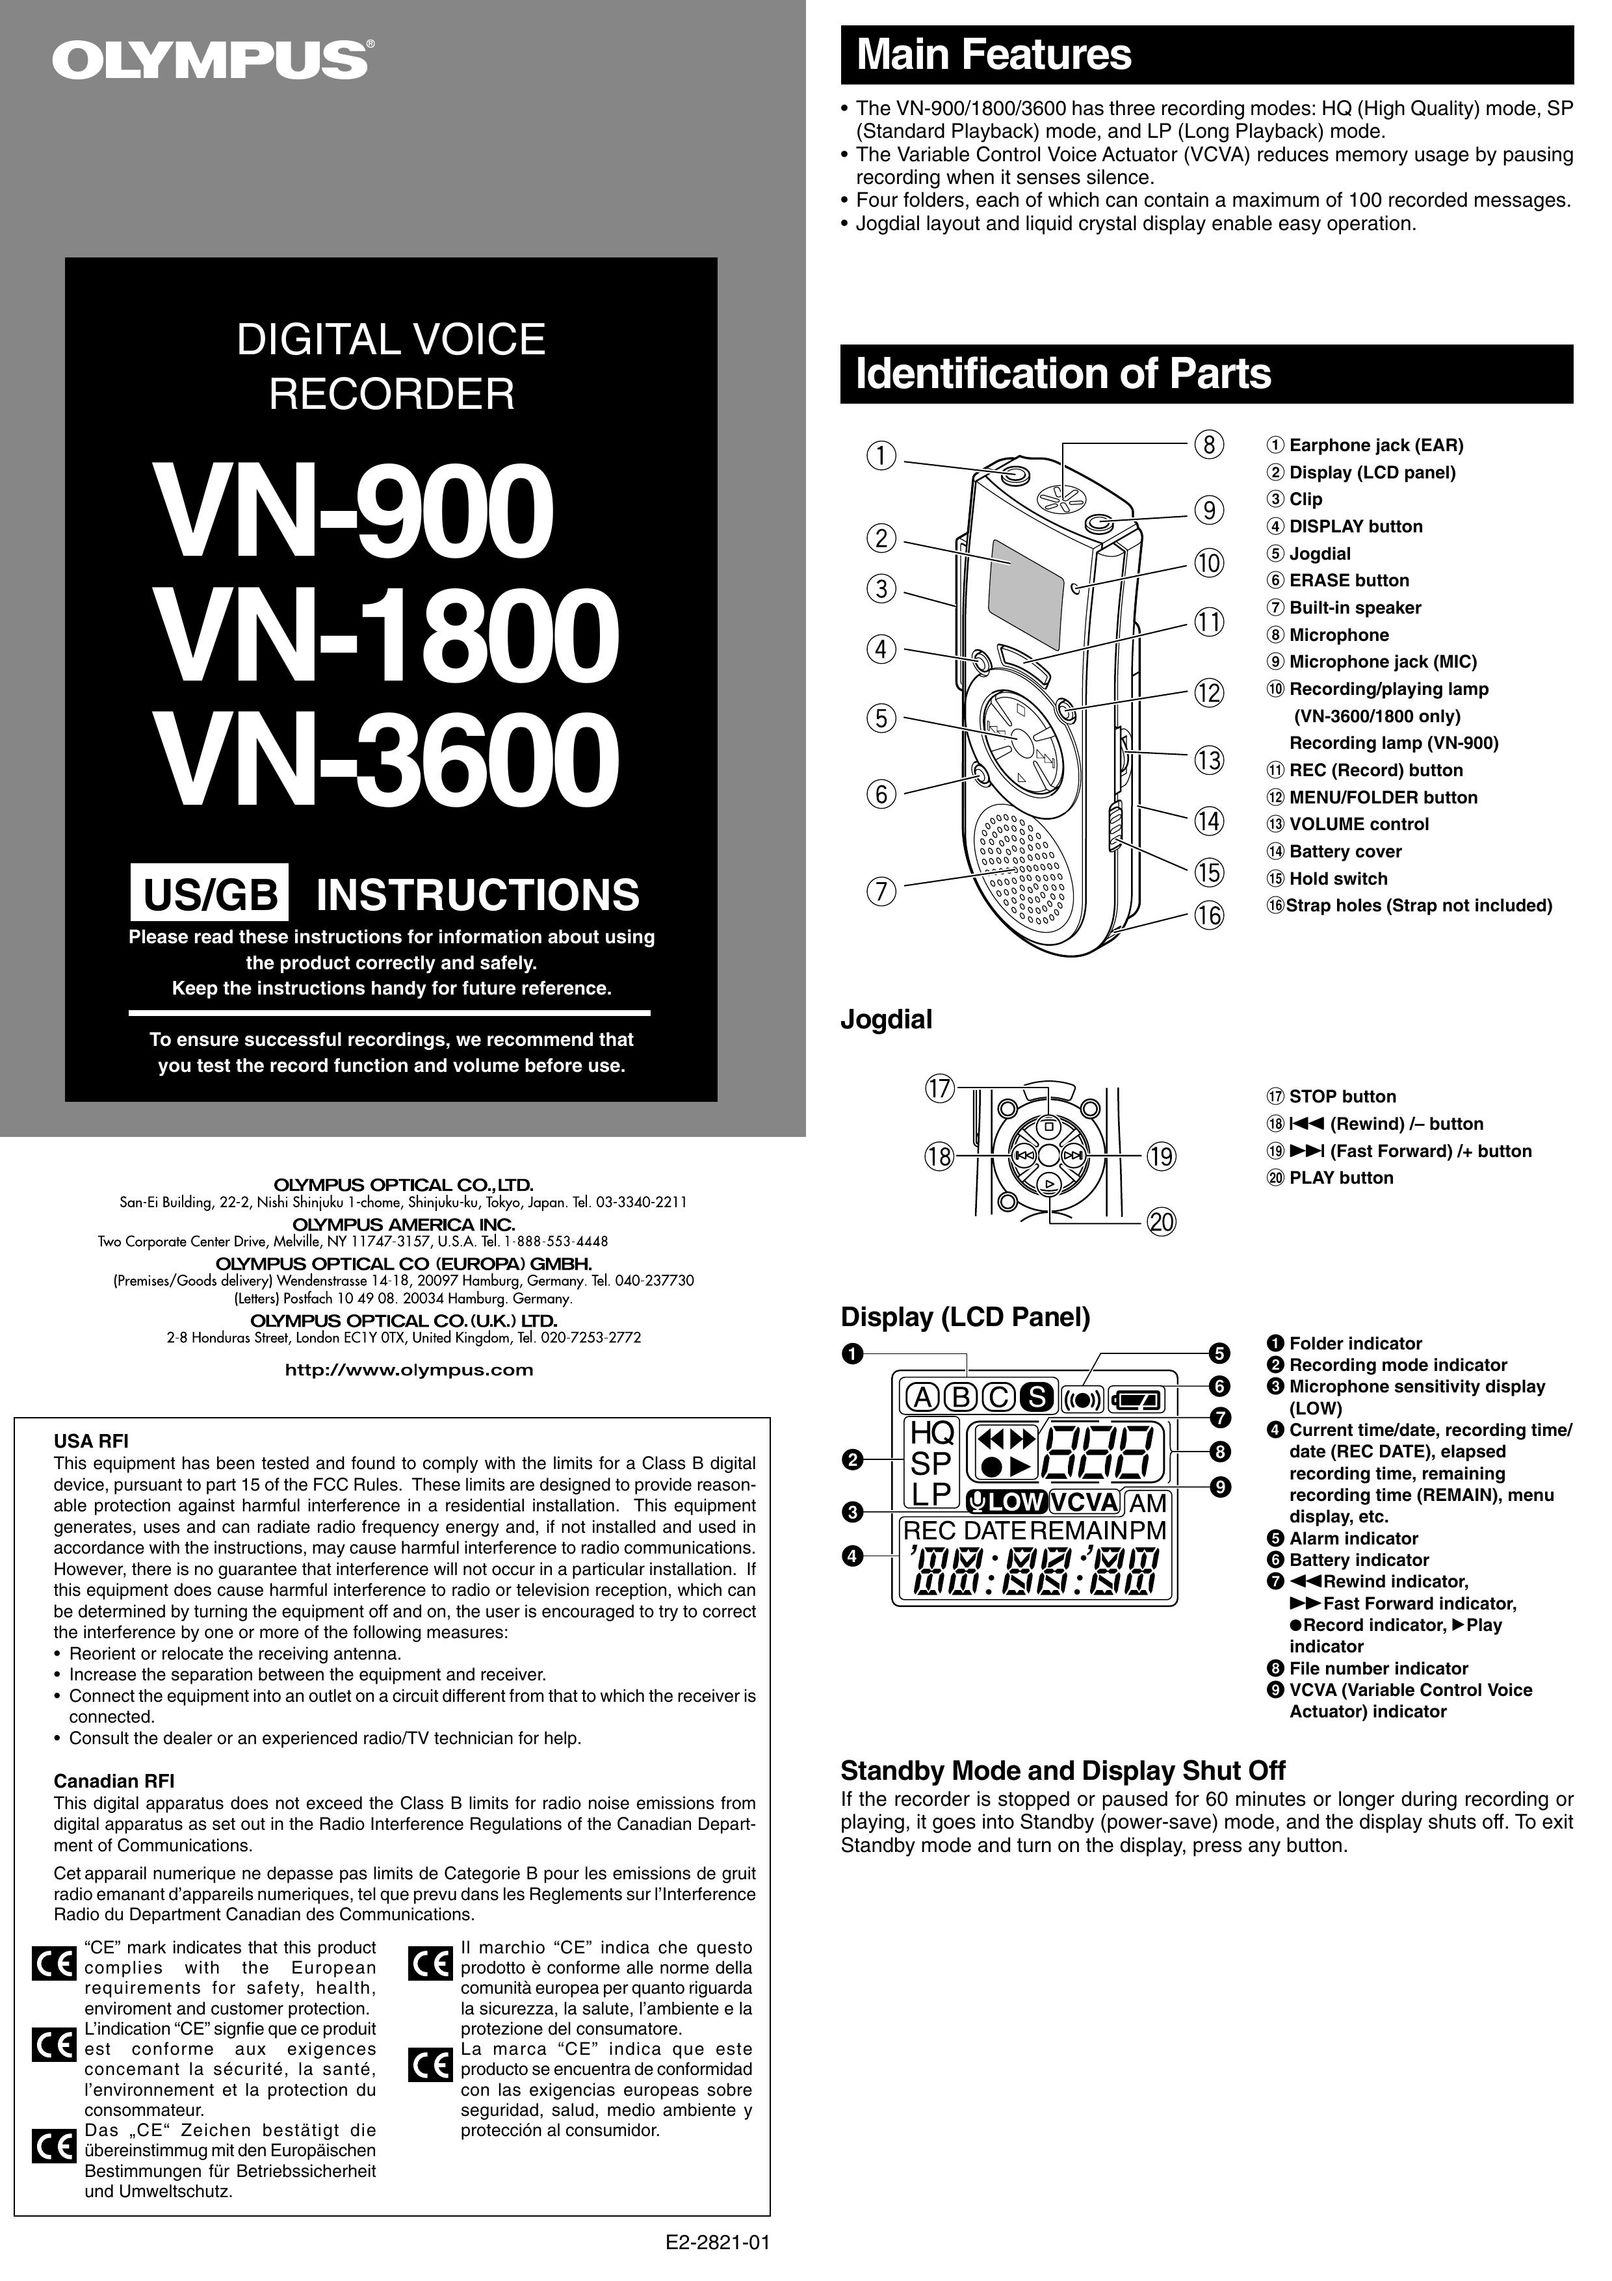 Olympus VN-900 Double Oven User Manual